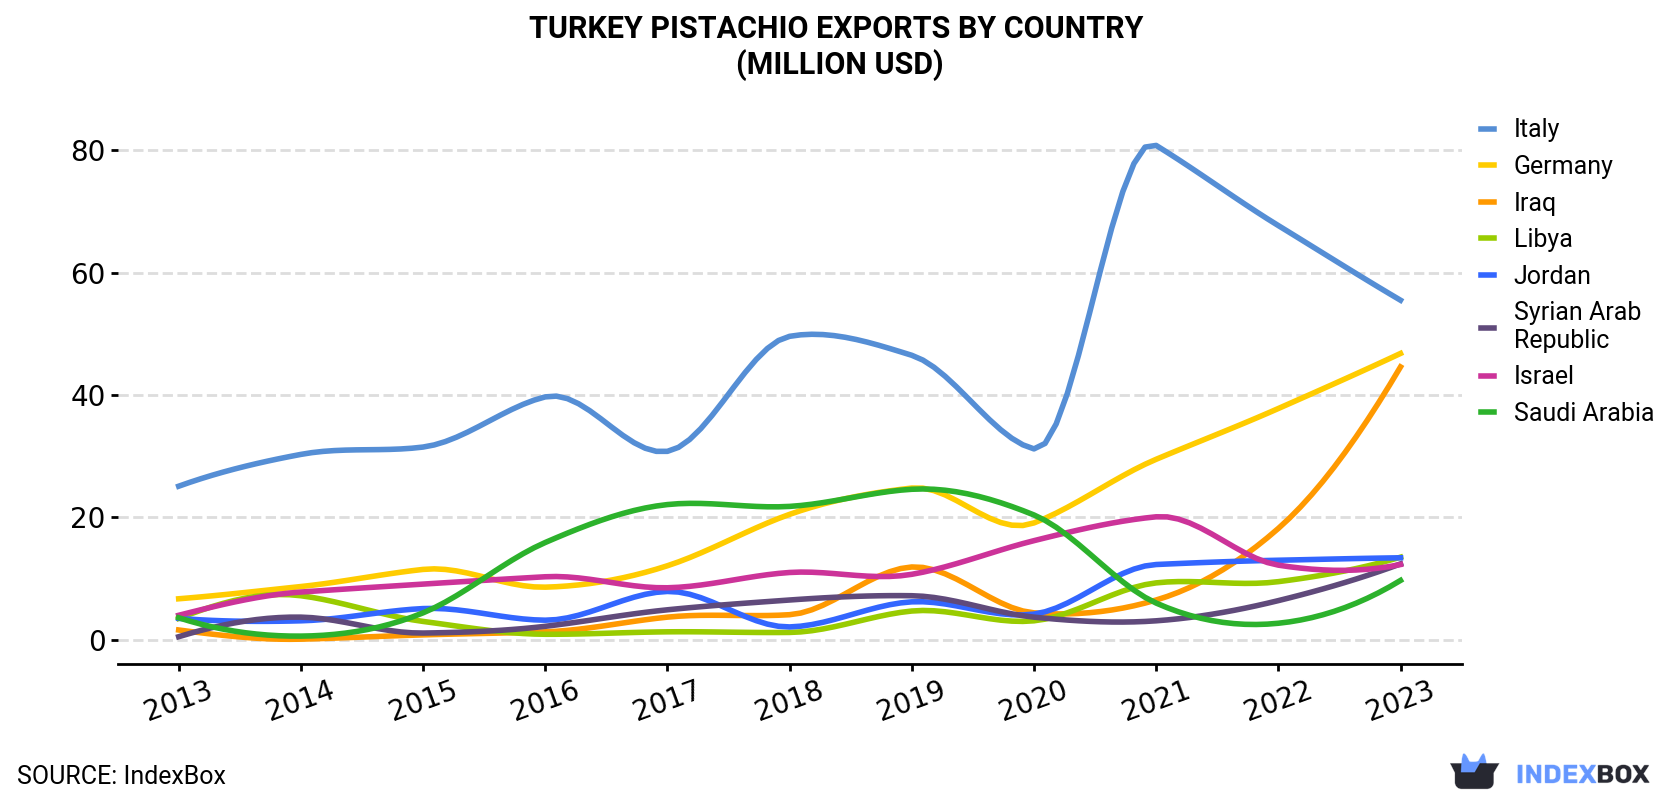 Turkey Pistachio Exports By Country (Million USD)